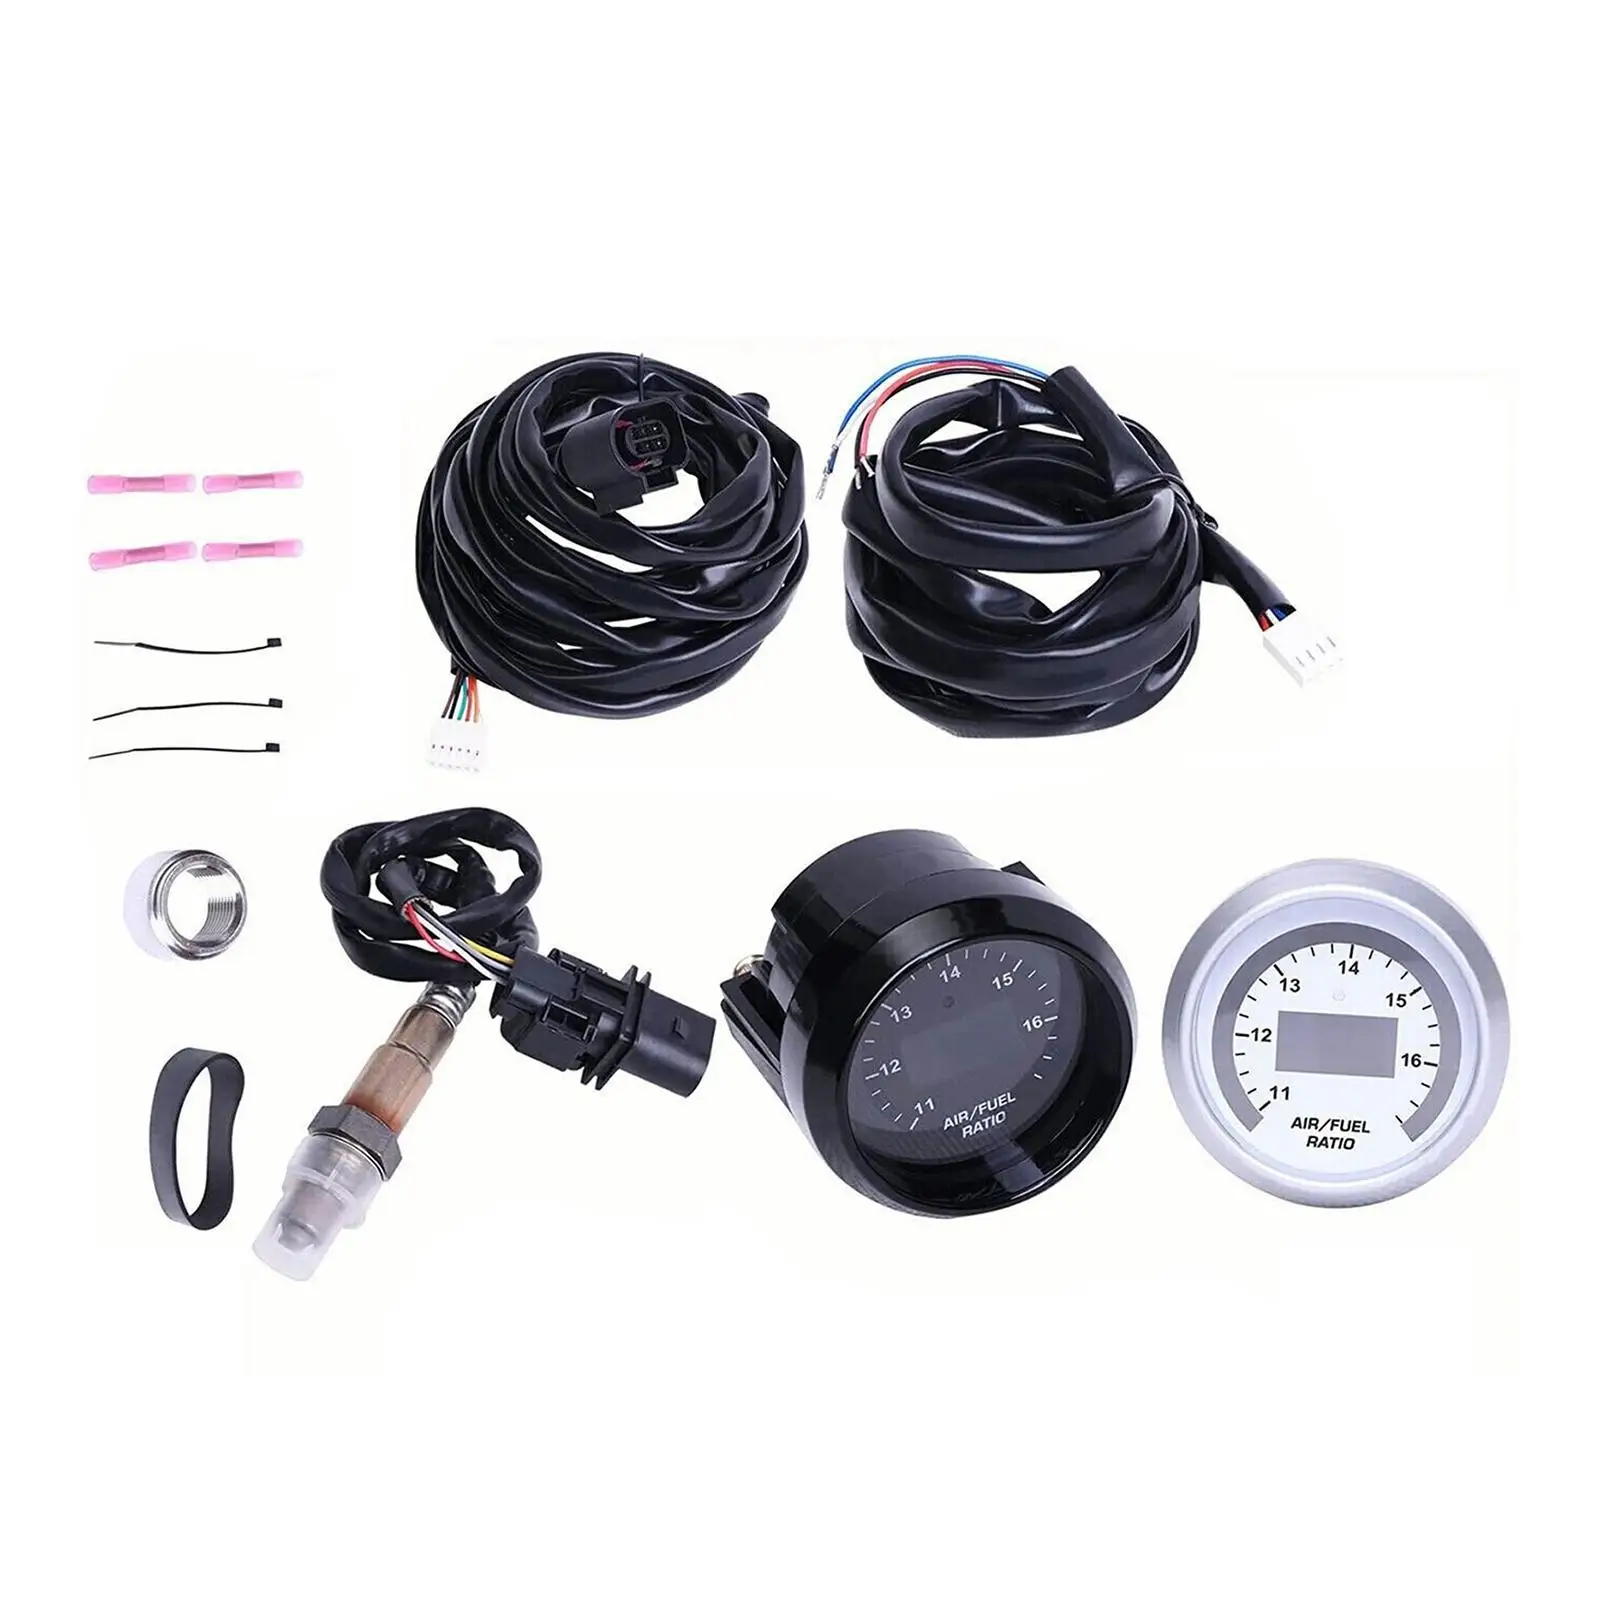 Air Fuel Ratio Gauge Kit with 4.9 Sensor Spare Parts Replacement 30-4110